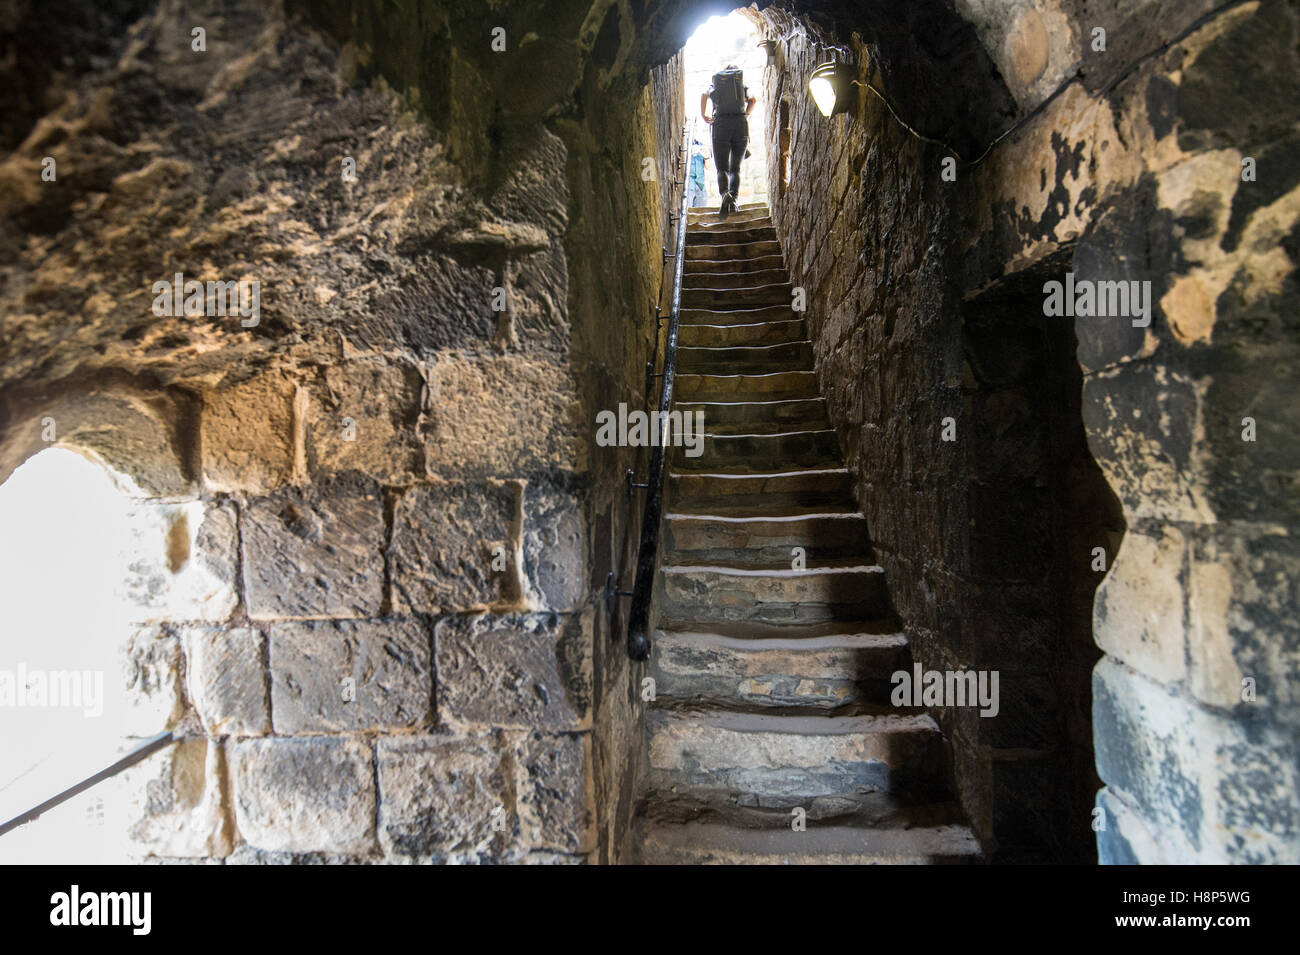 UK, England, Yorkshire, Richmond - A young female tourist climbing a staircase inside the Richmond Castle, one of North Yorkshir Stock Photo